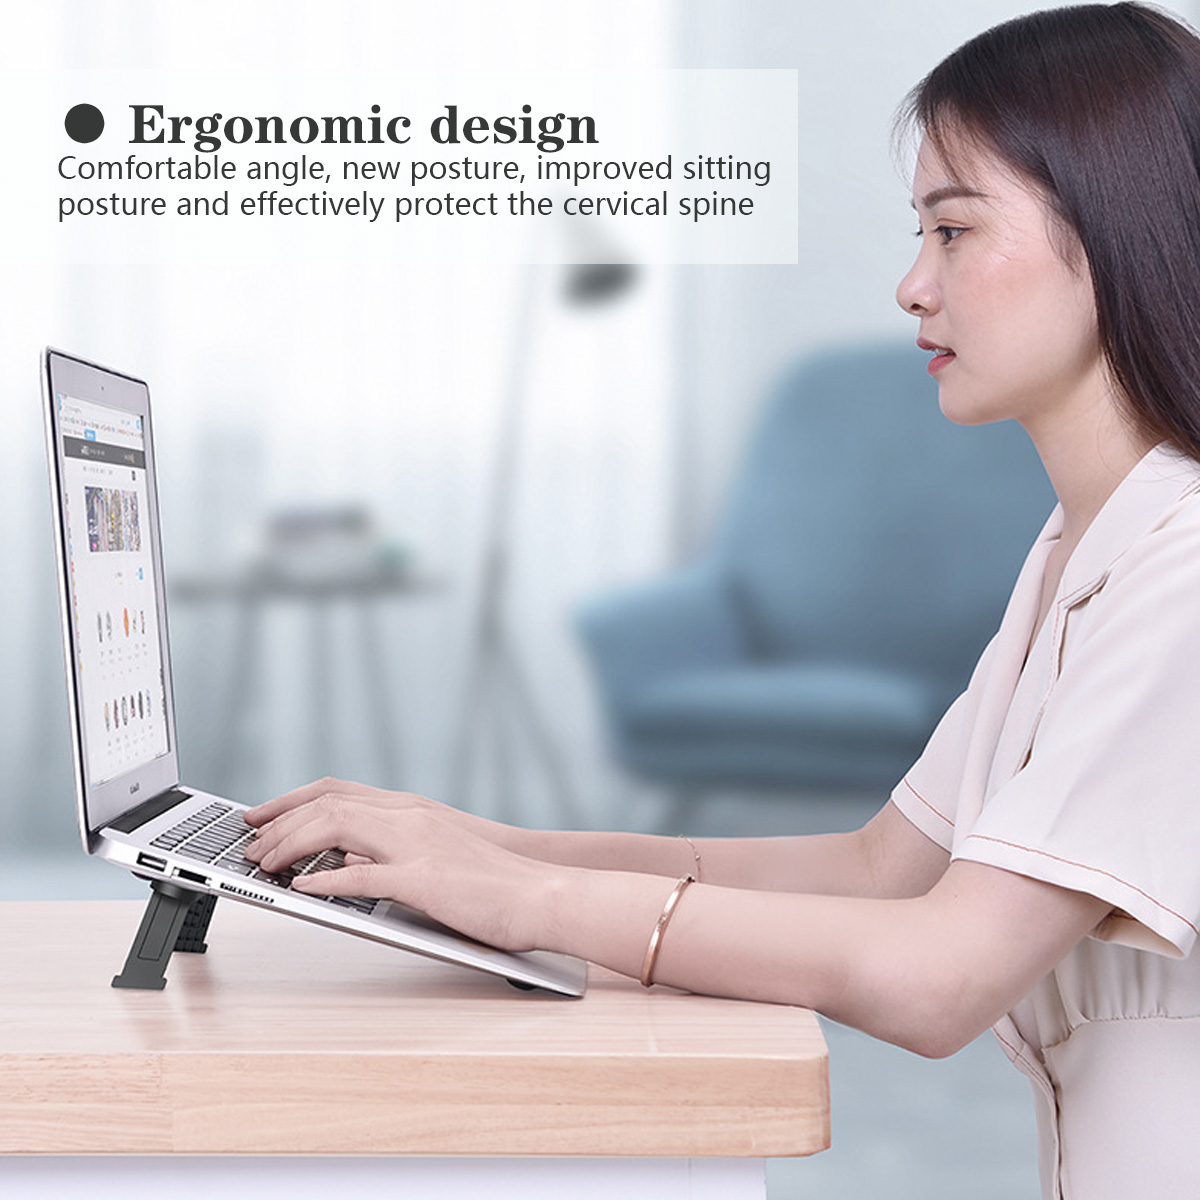 Portable-Folding-Double-Angle-Adjustable-Heat-Dissipation-Cooling-Down-Sticky-Macbook-Holder-Stand-f-1832936-3